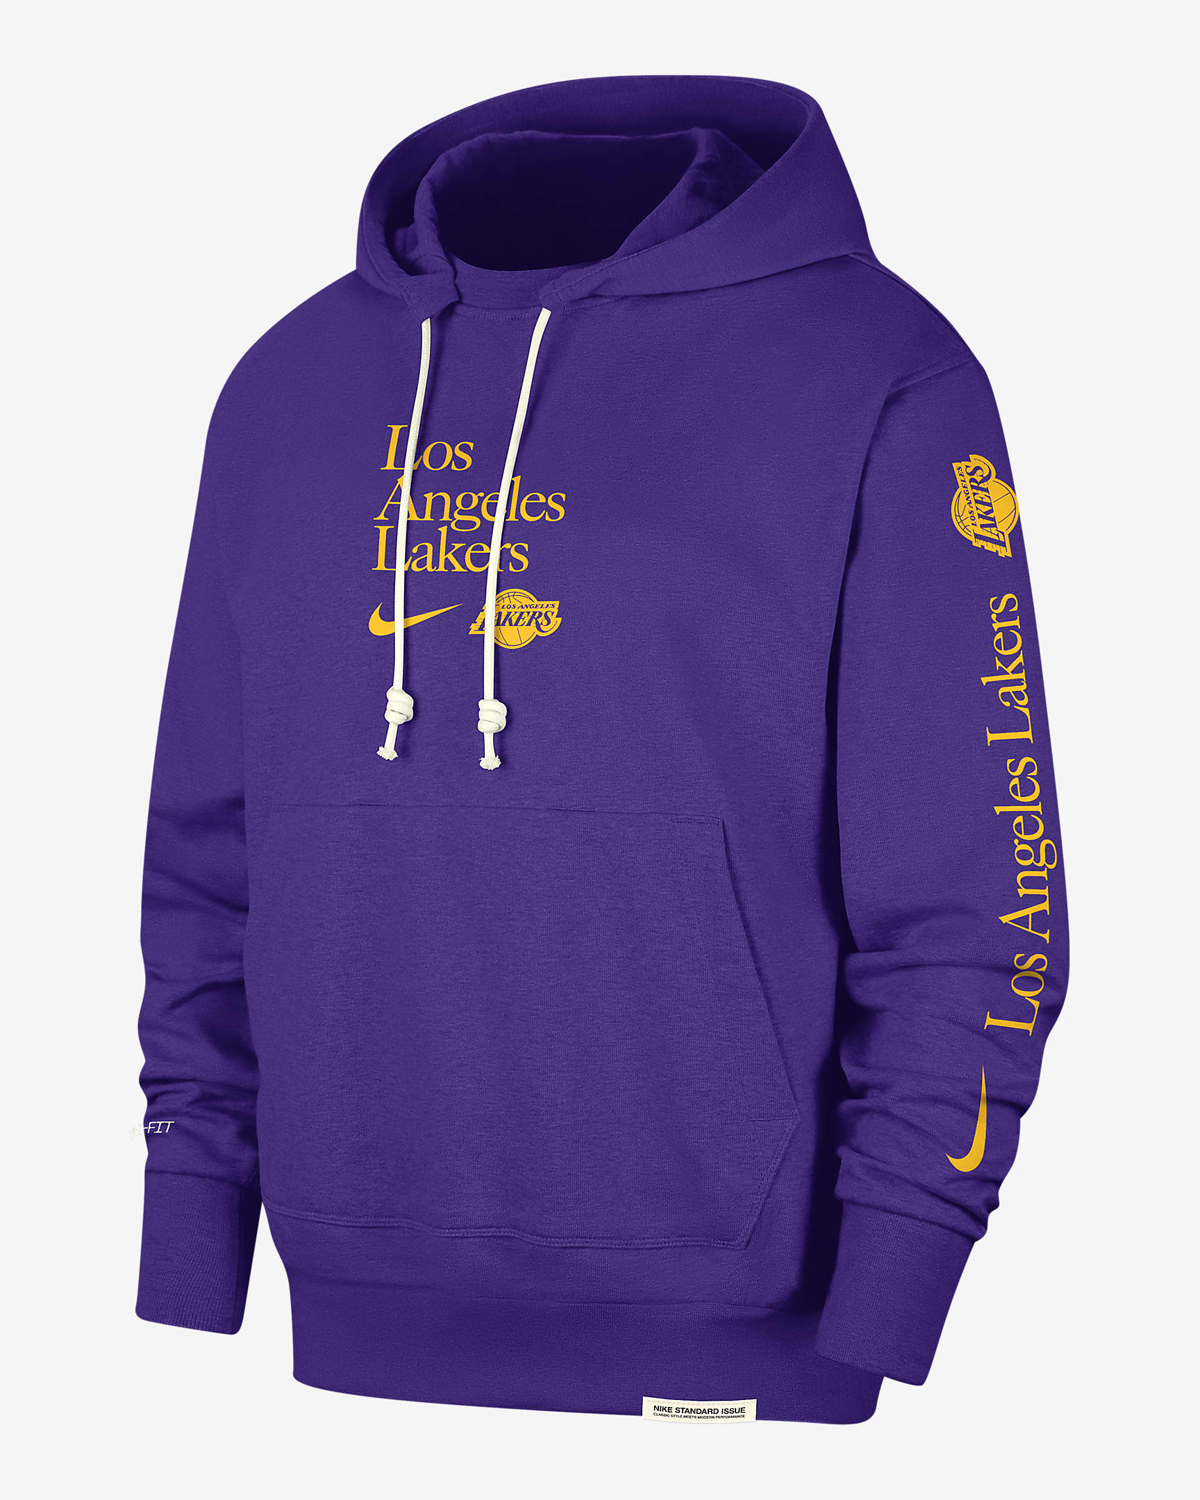 Nike-Lakers-Standard-Issue-Courtside-Hoodie